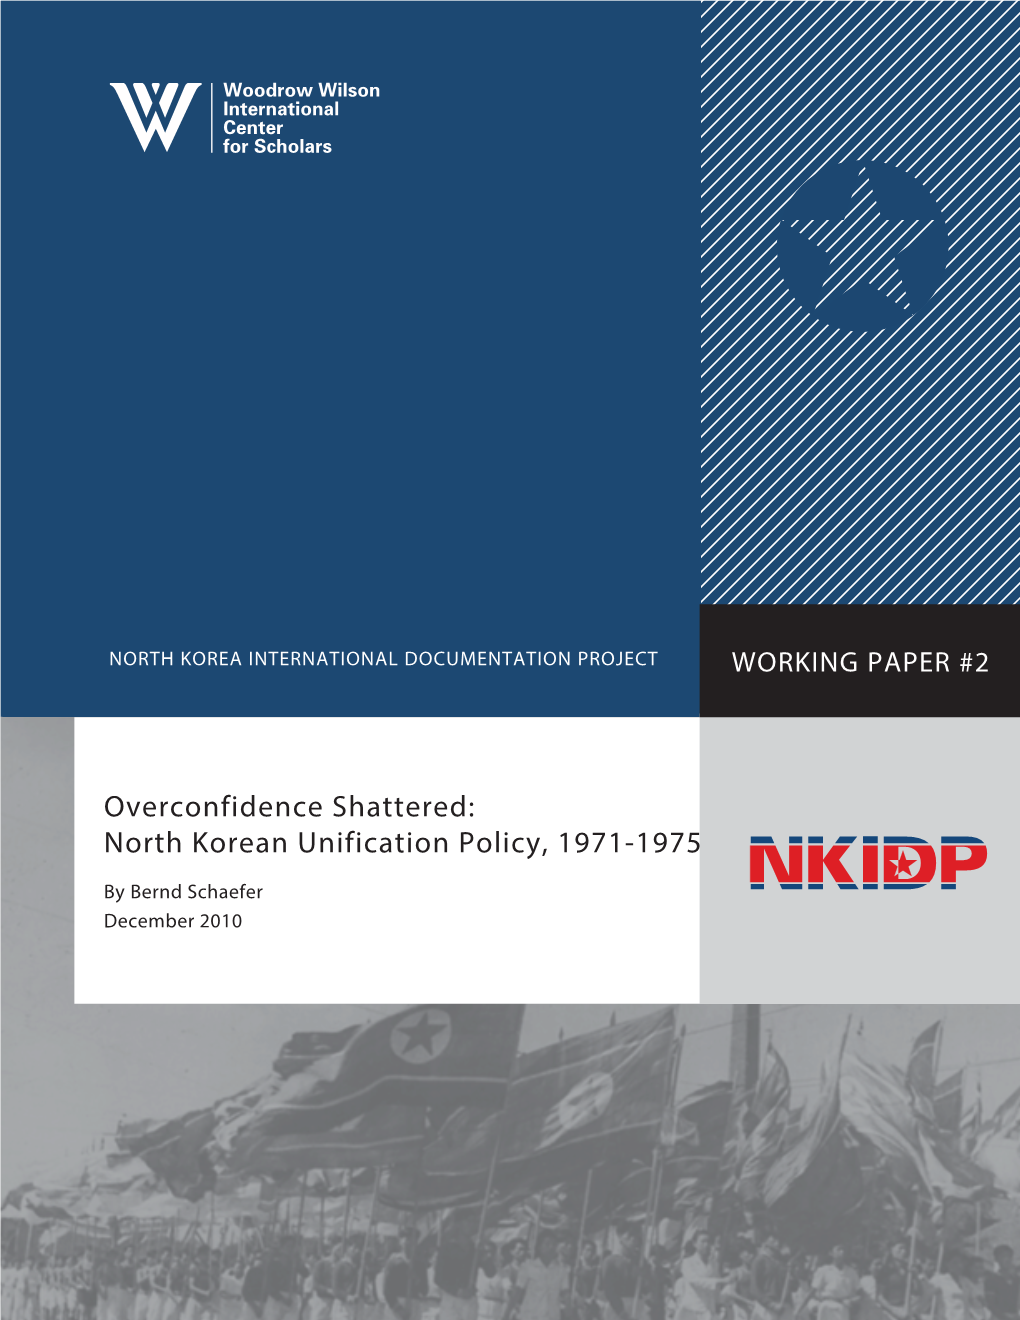 Overconfidence Shattered: North Korean Unification Policy, 1971-1975